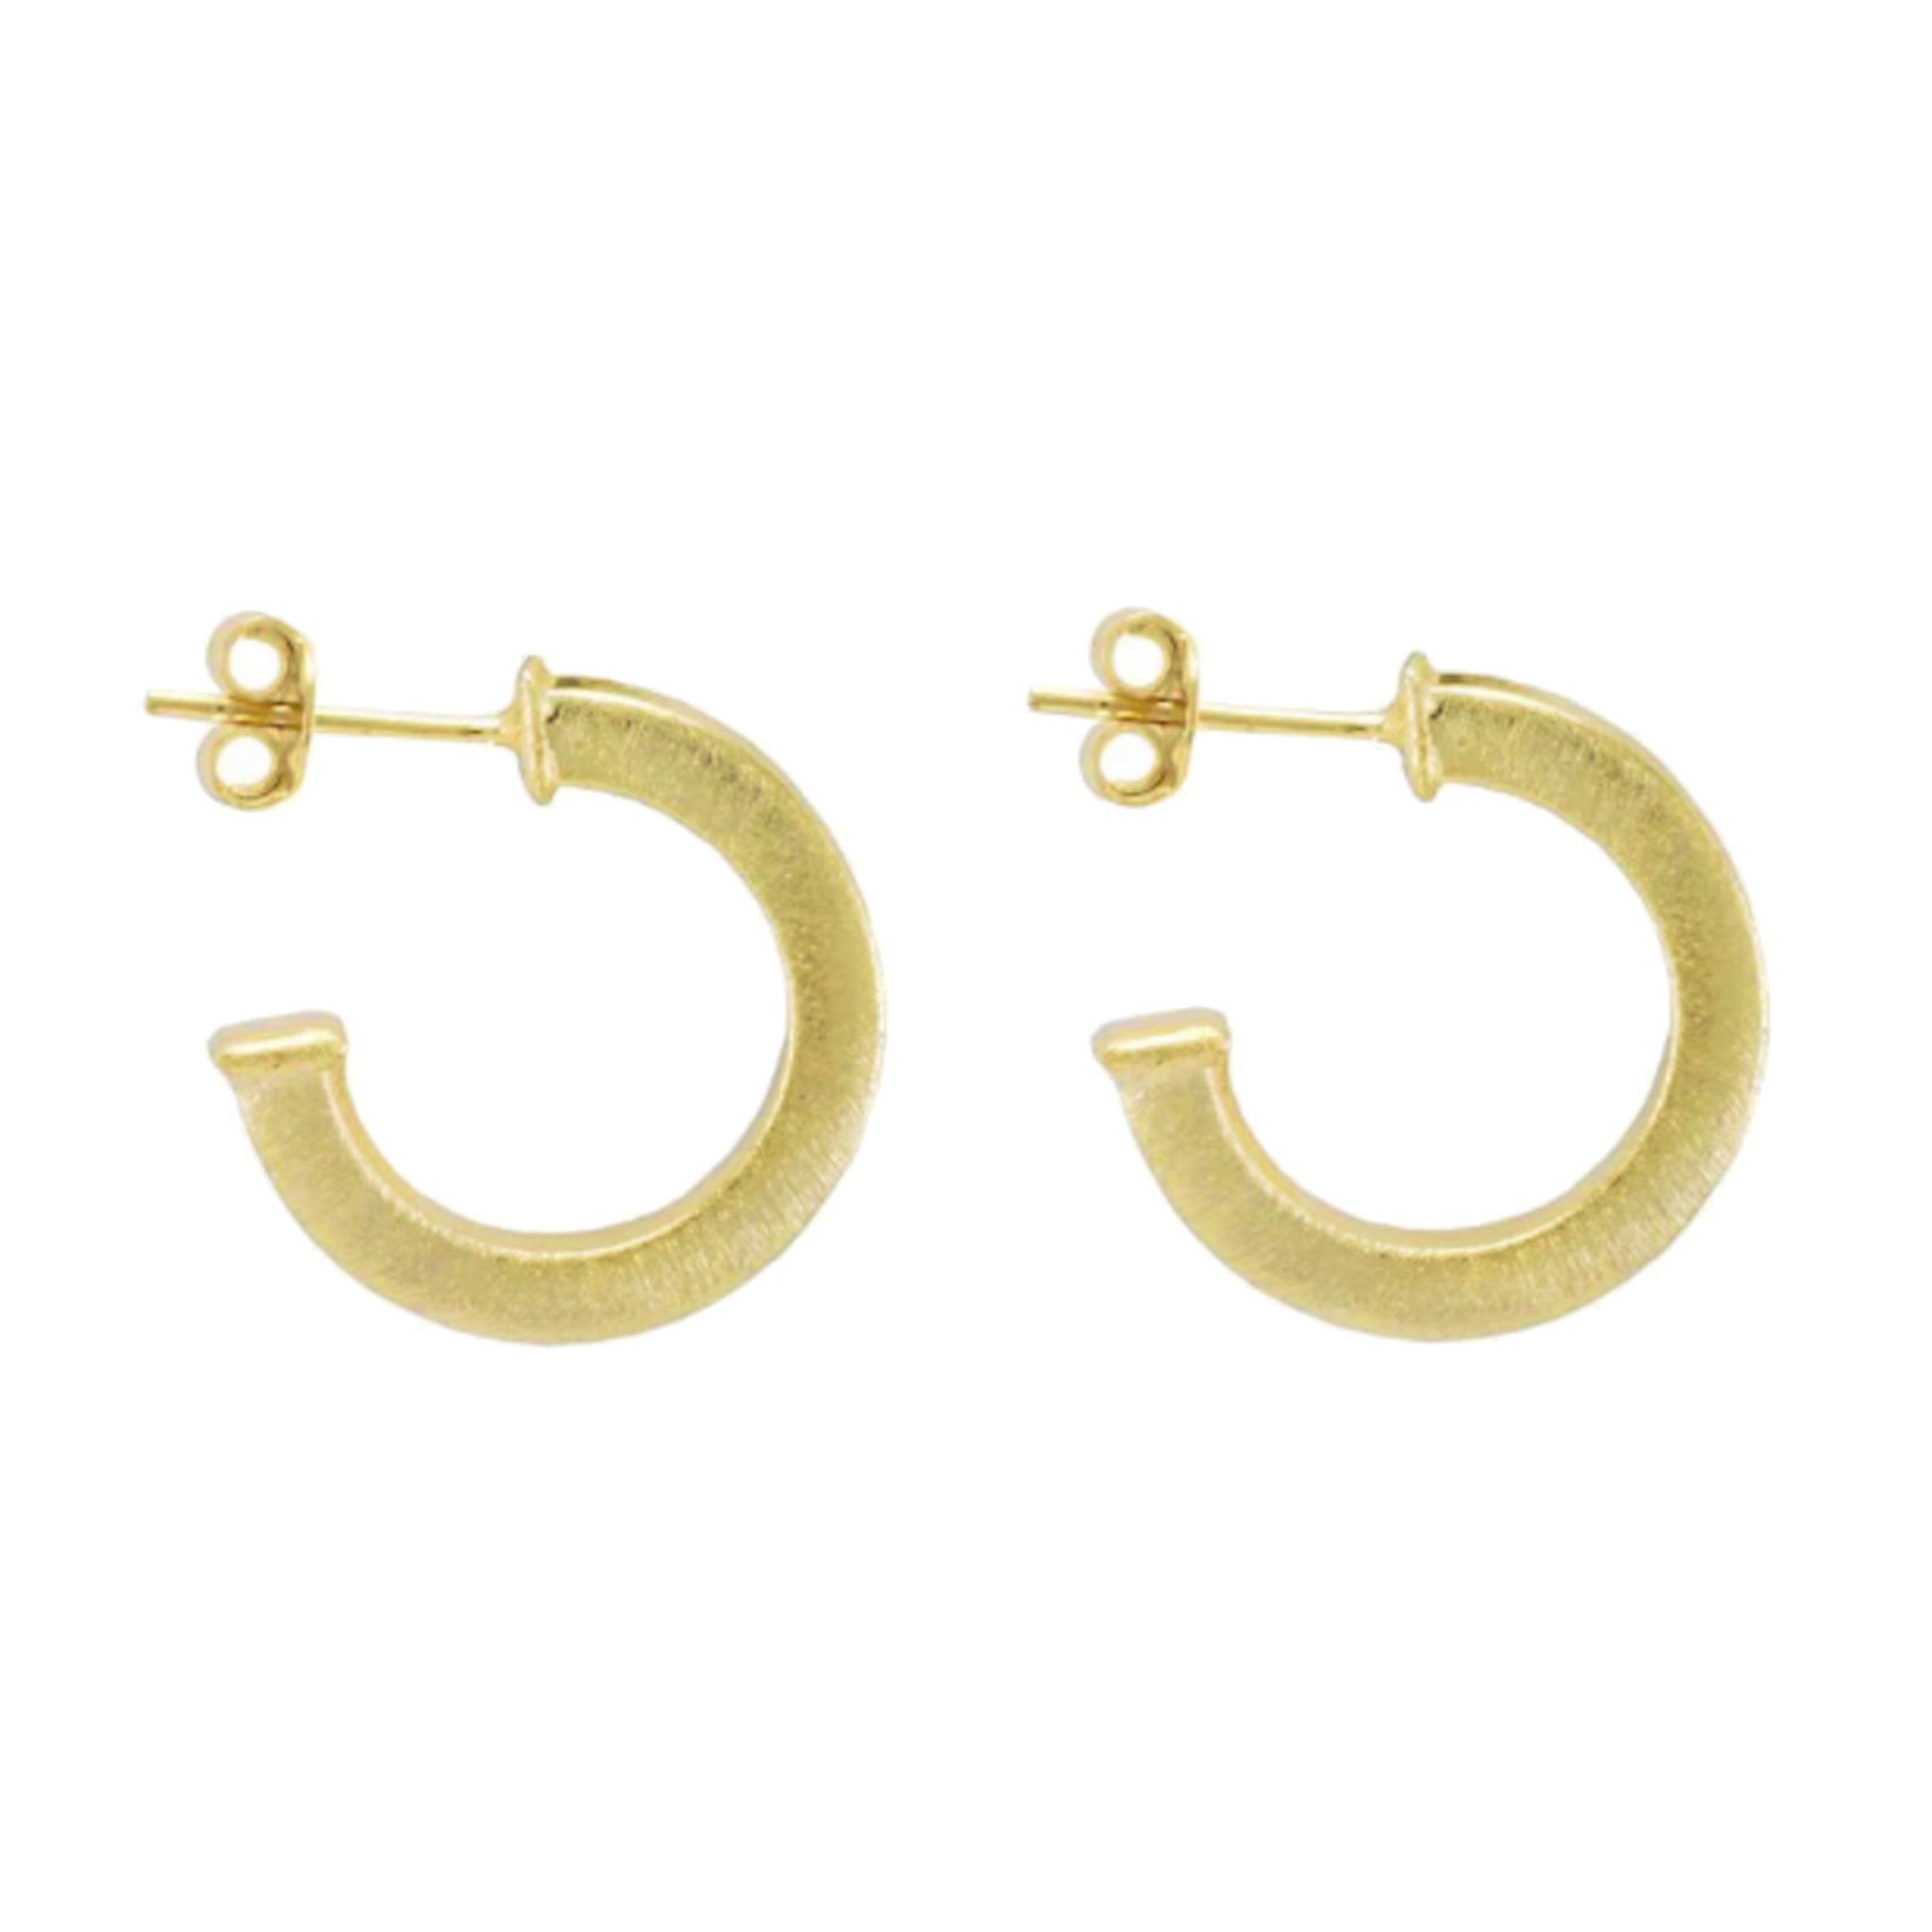 Sheila Fajl Bianca Petite Square Styled Hoop Earrings in Brushed Gold Plated